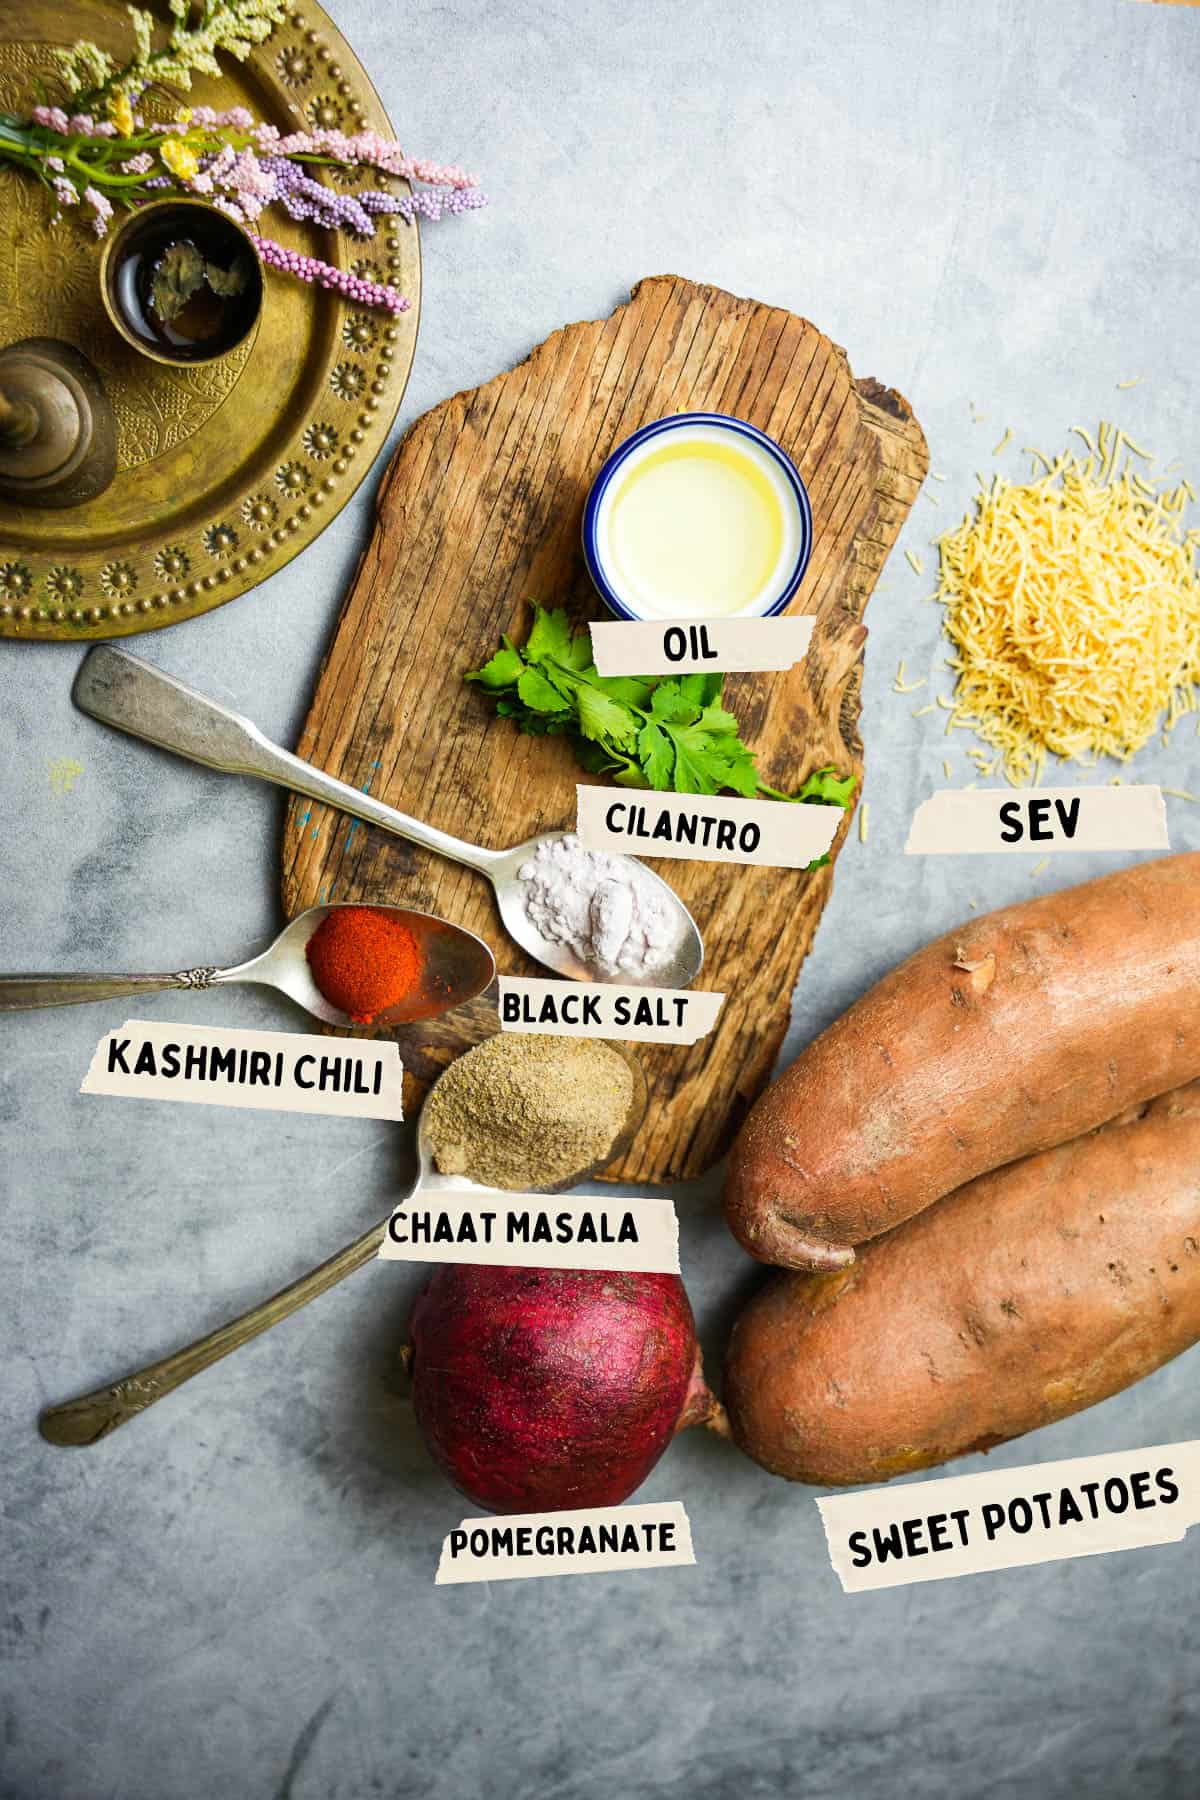 Ingredients for making shakarkandi chaat are measured out and labeled on a stone countertop.